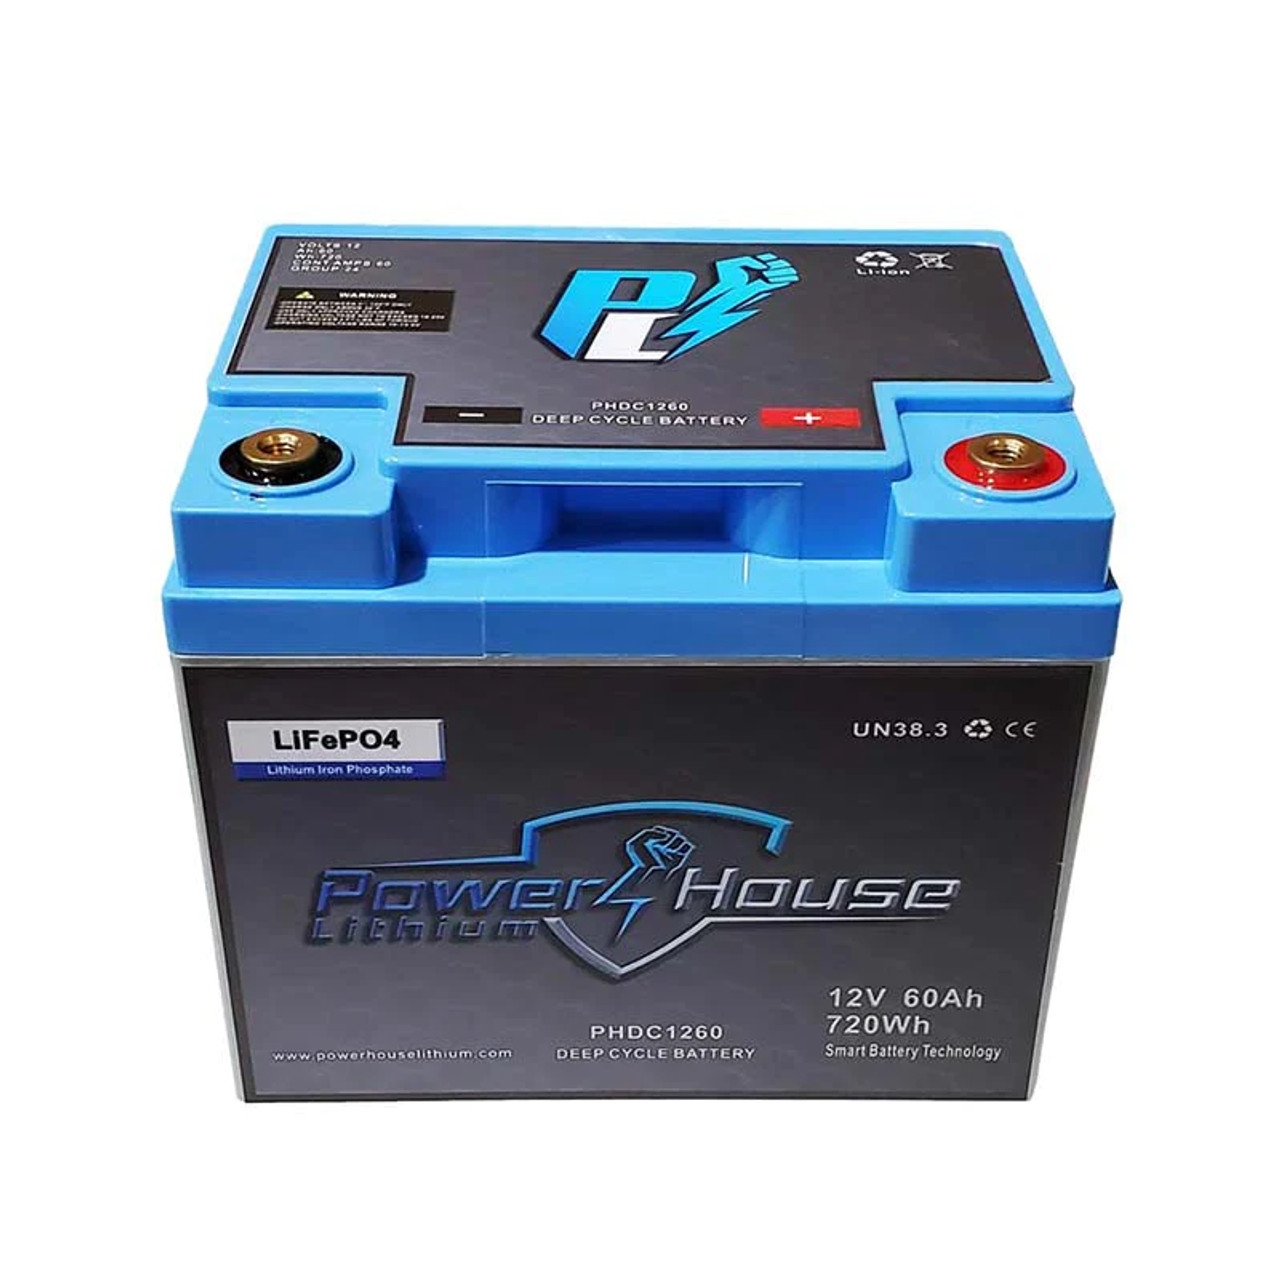 PowerHouse Lithium Battery - 12V 60Ah Deep Cycle (front view)